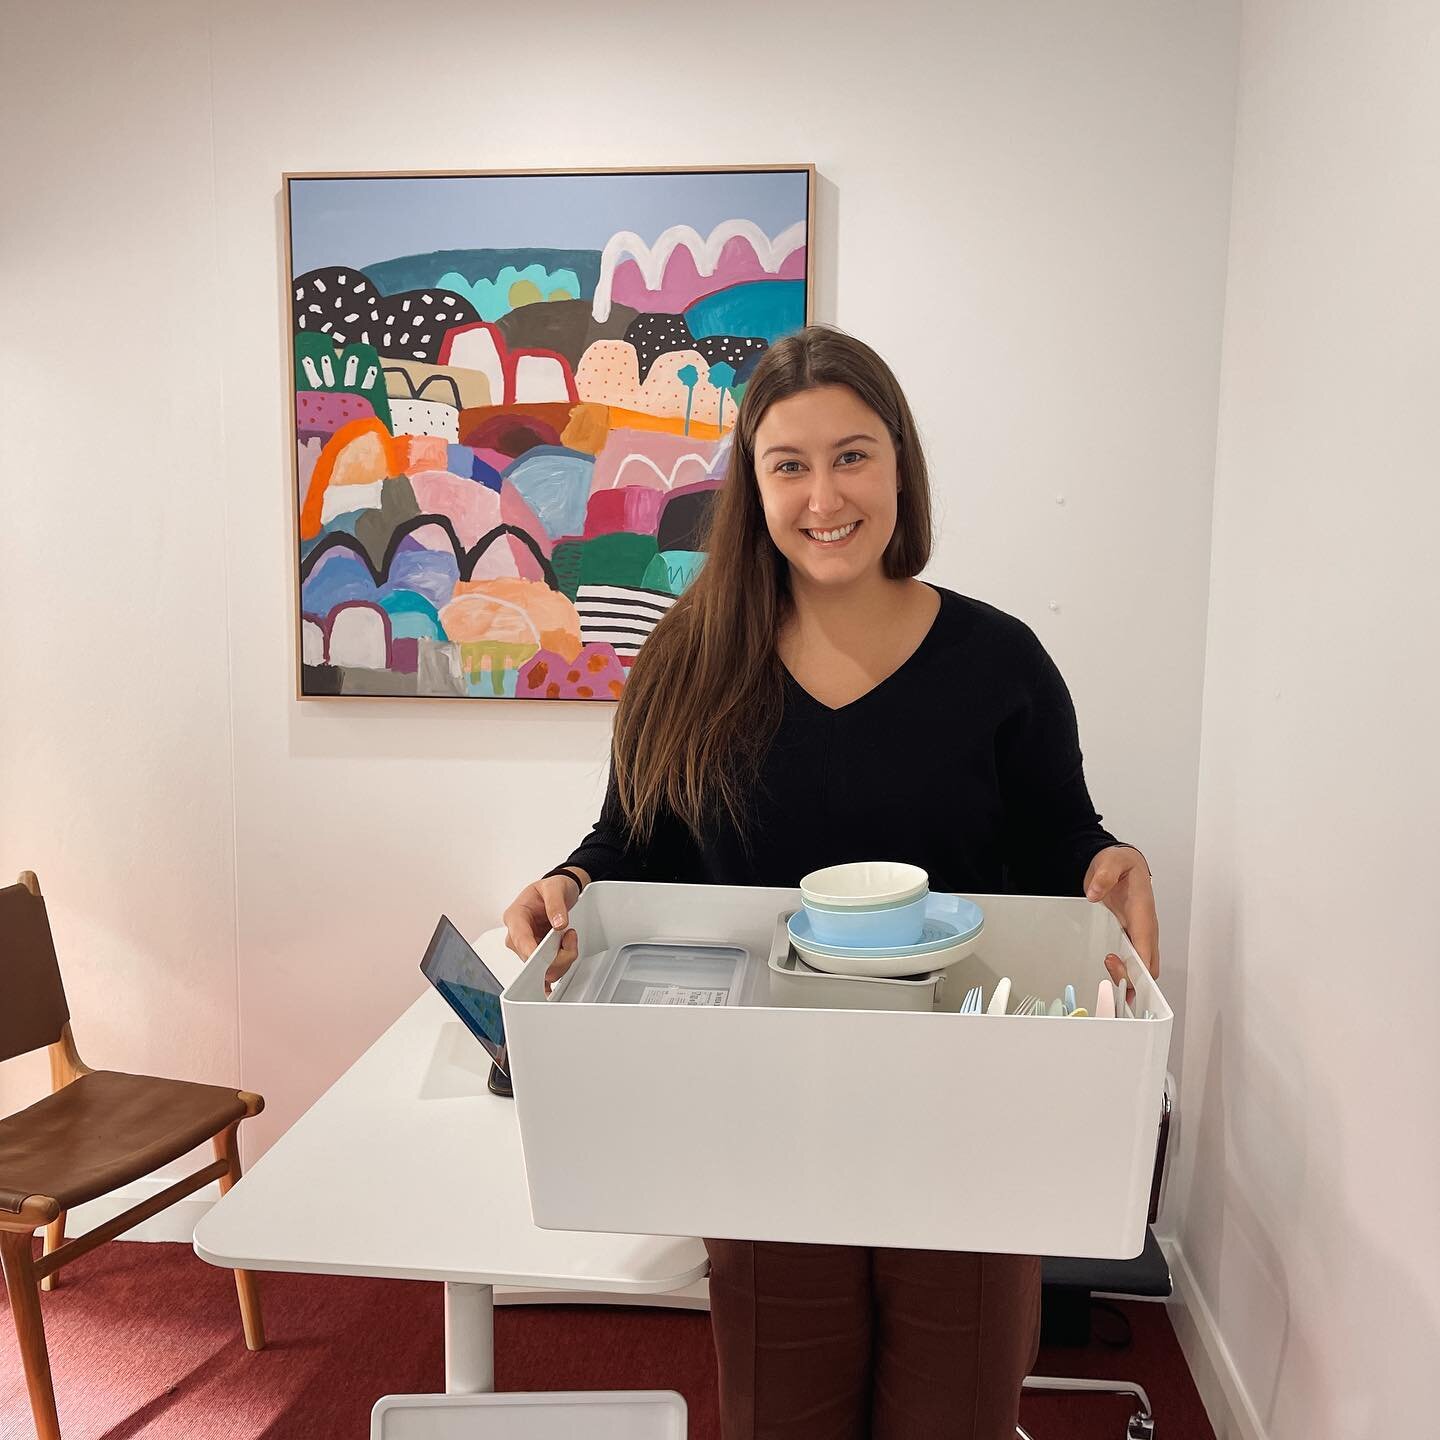 Brianna setting up food play for one of her clients today! 

Food play offers an opportunity for those to explore and learn about foods, without any pressure to eat or try the foods.

Brianna has a special interest in helping cautious eaters and thos